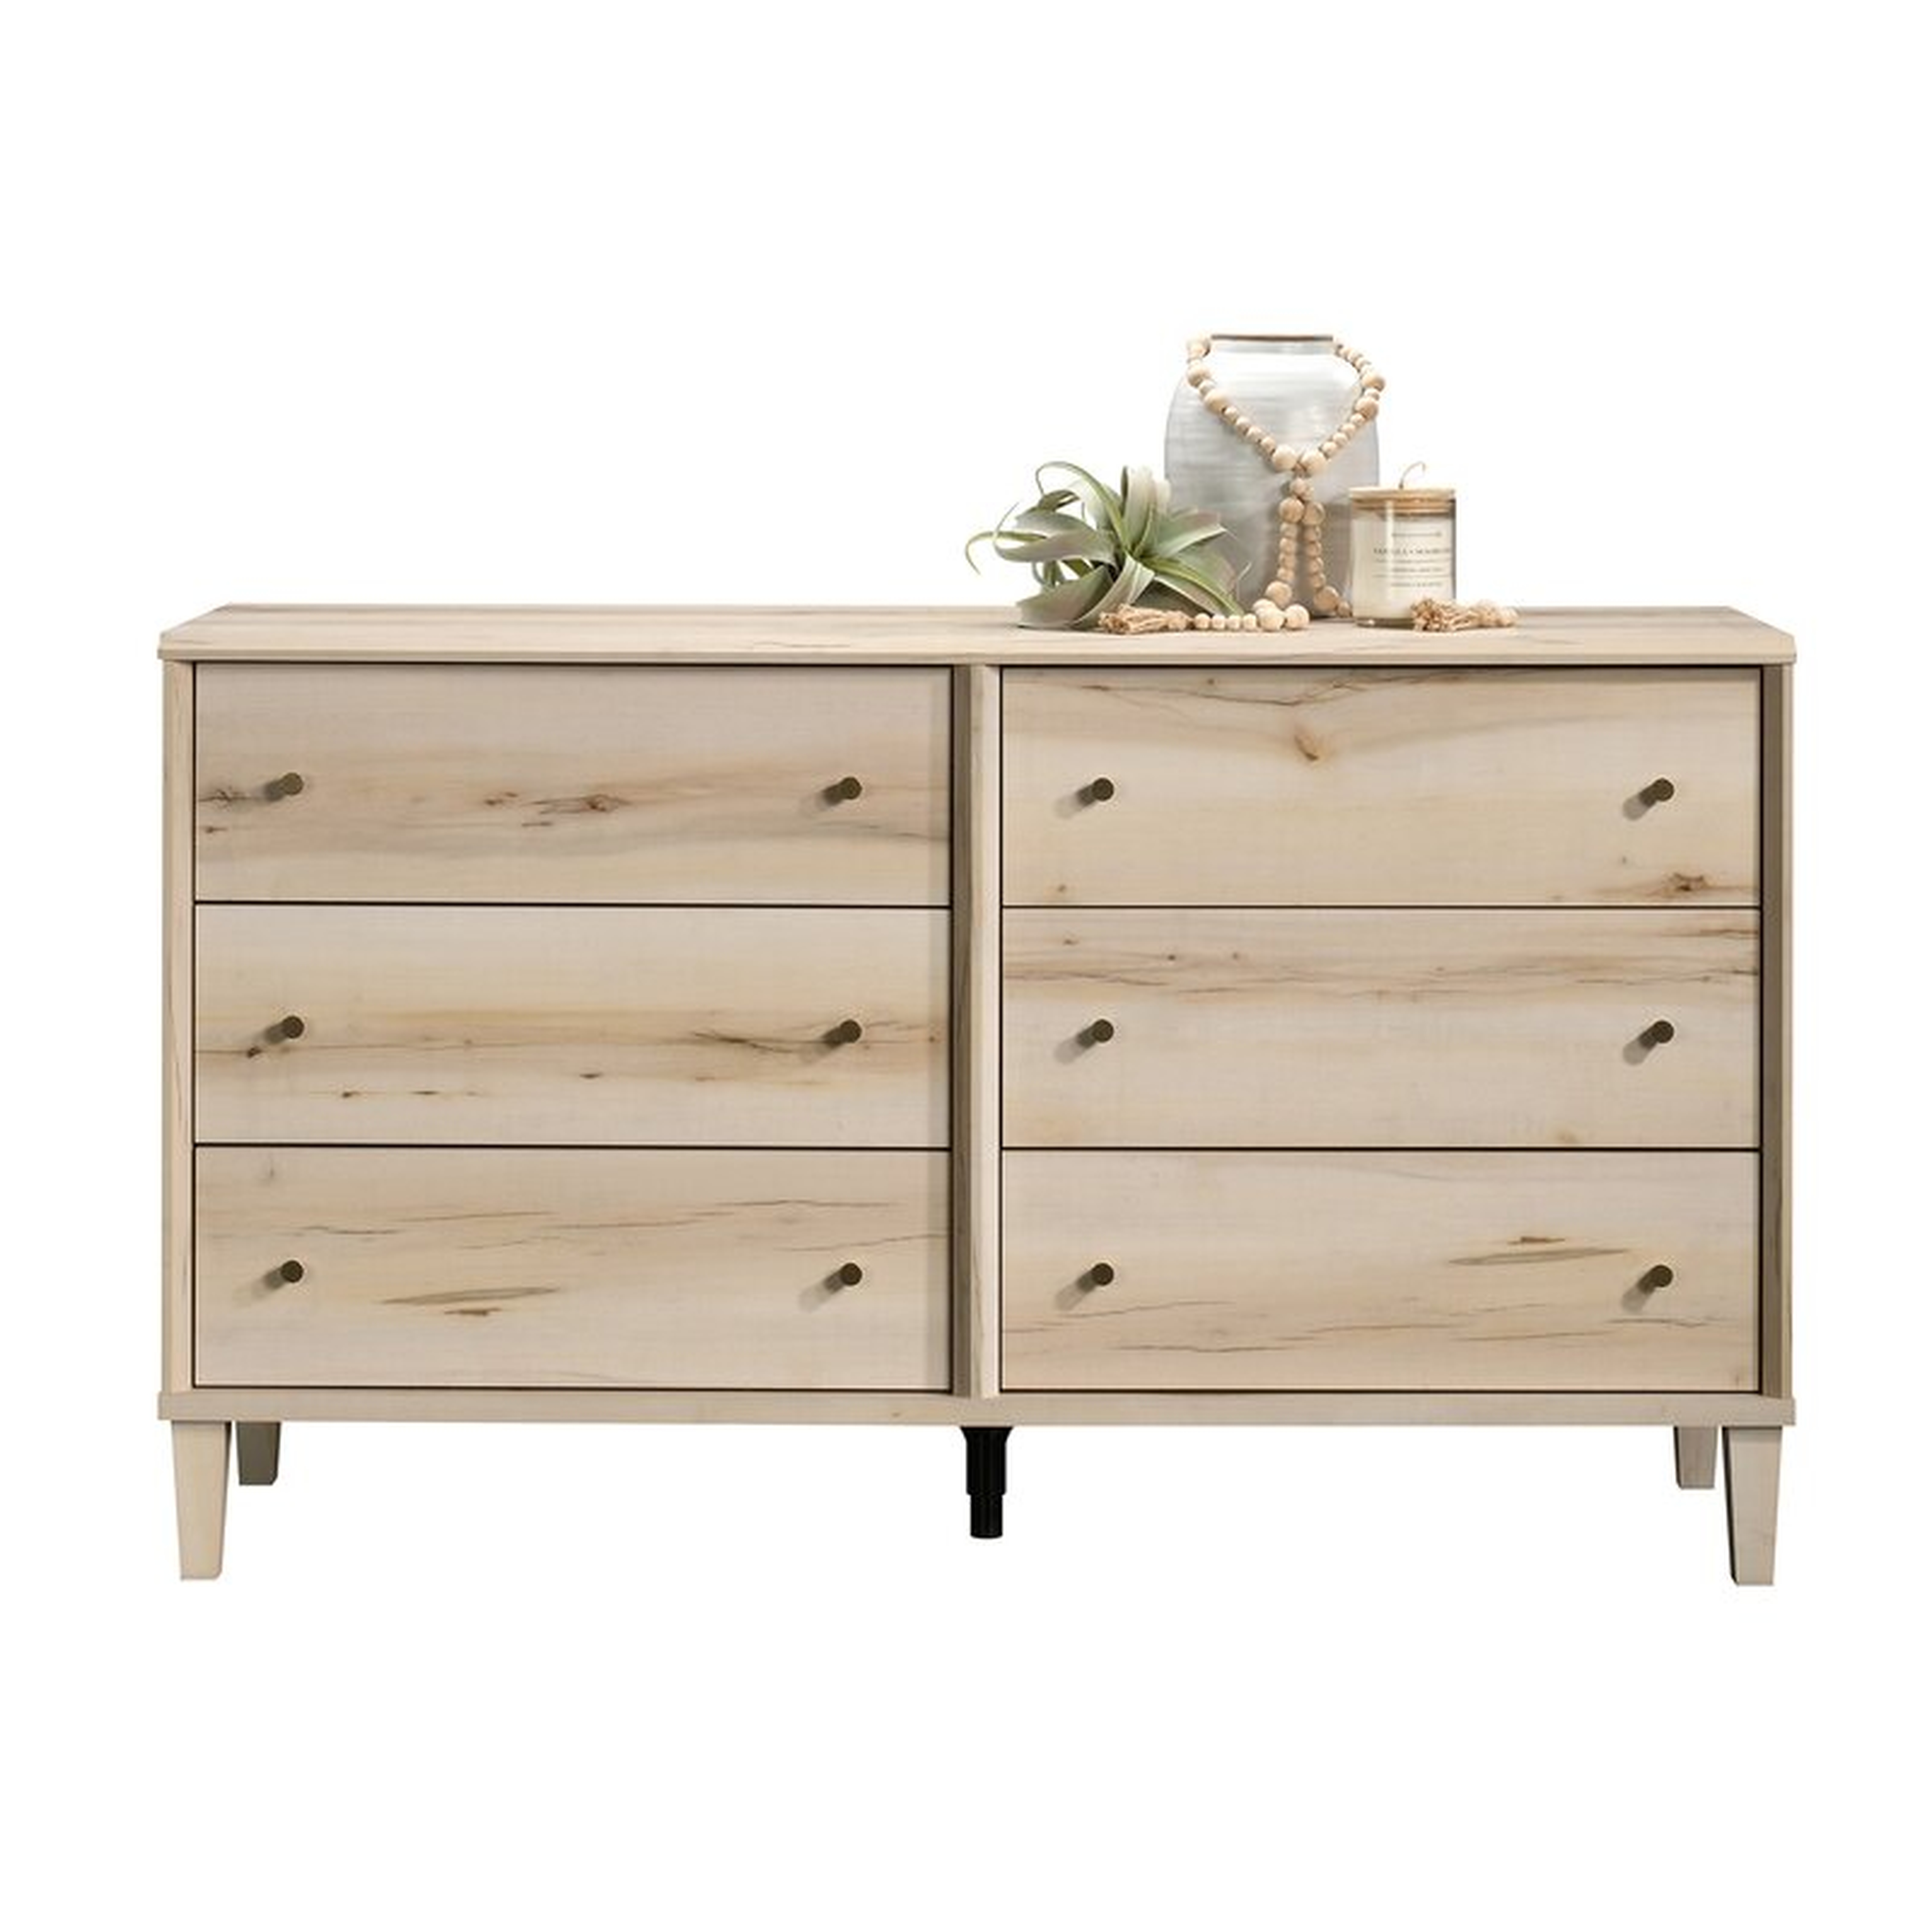 Sydnor Willow Place 6 Drawer Double Dresser - Wayfair